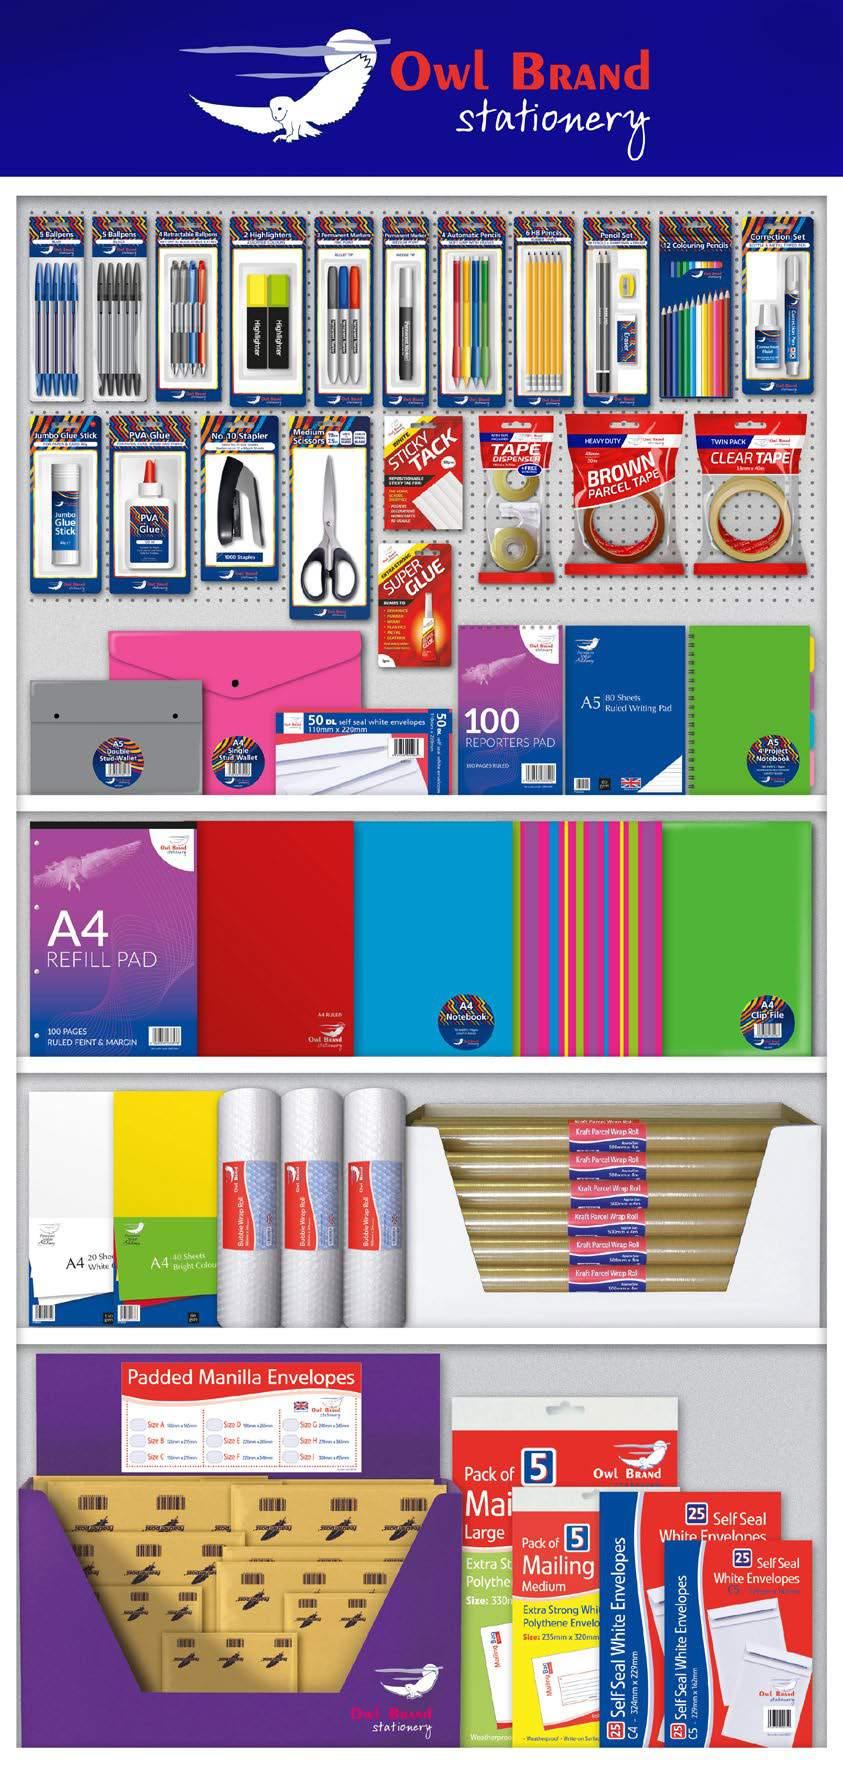 Your one stop stationery supplier. Quality and price assured!